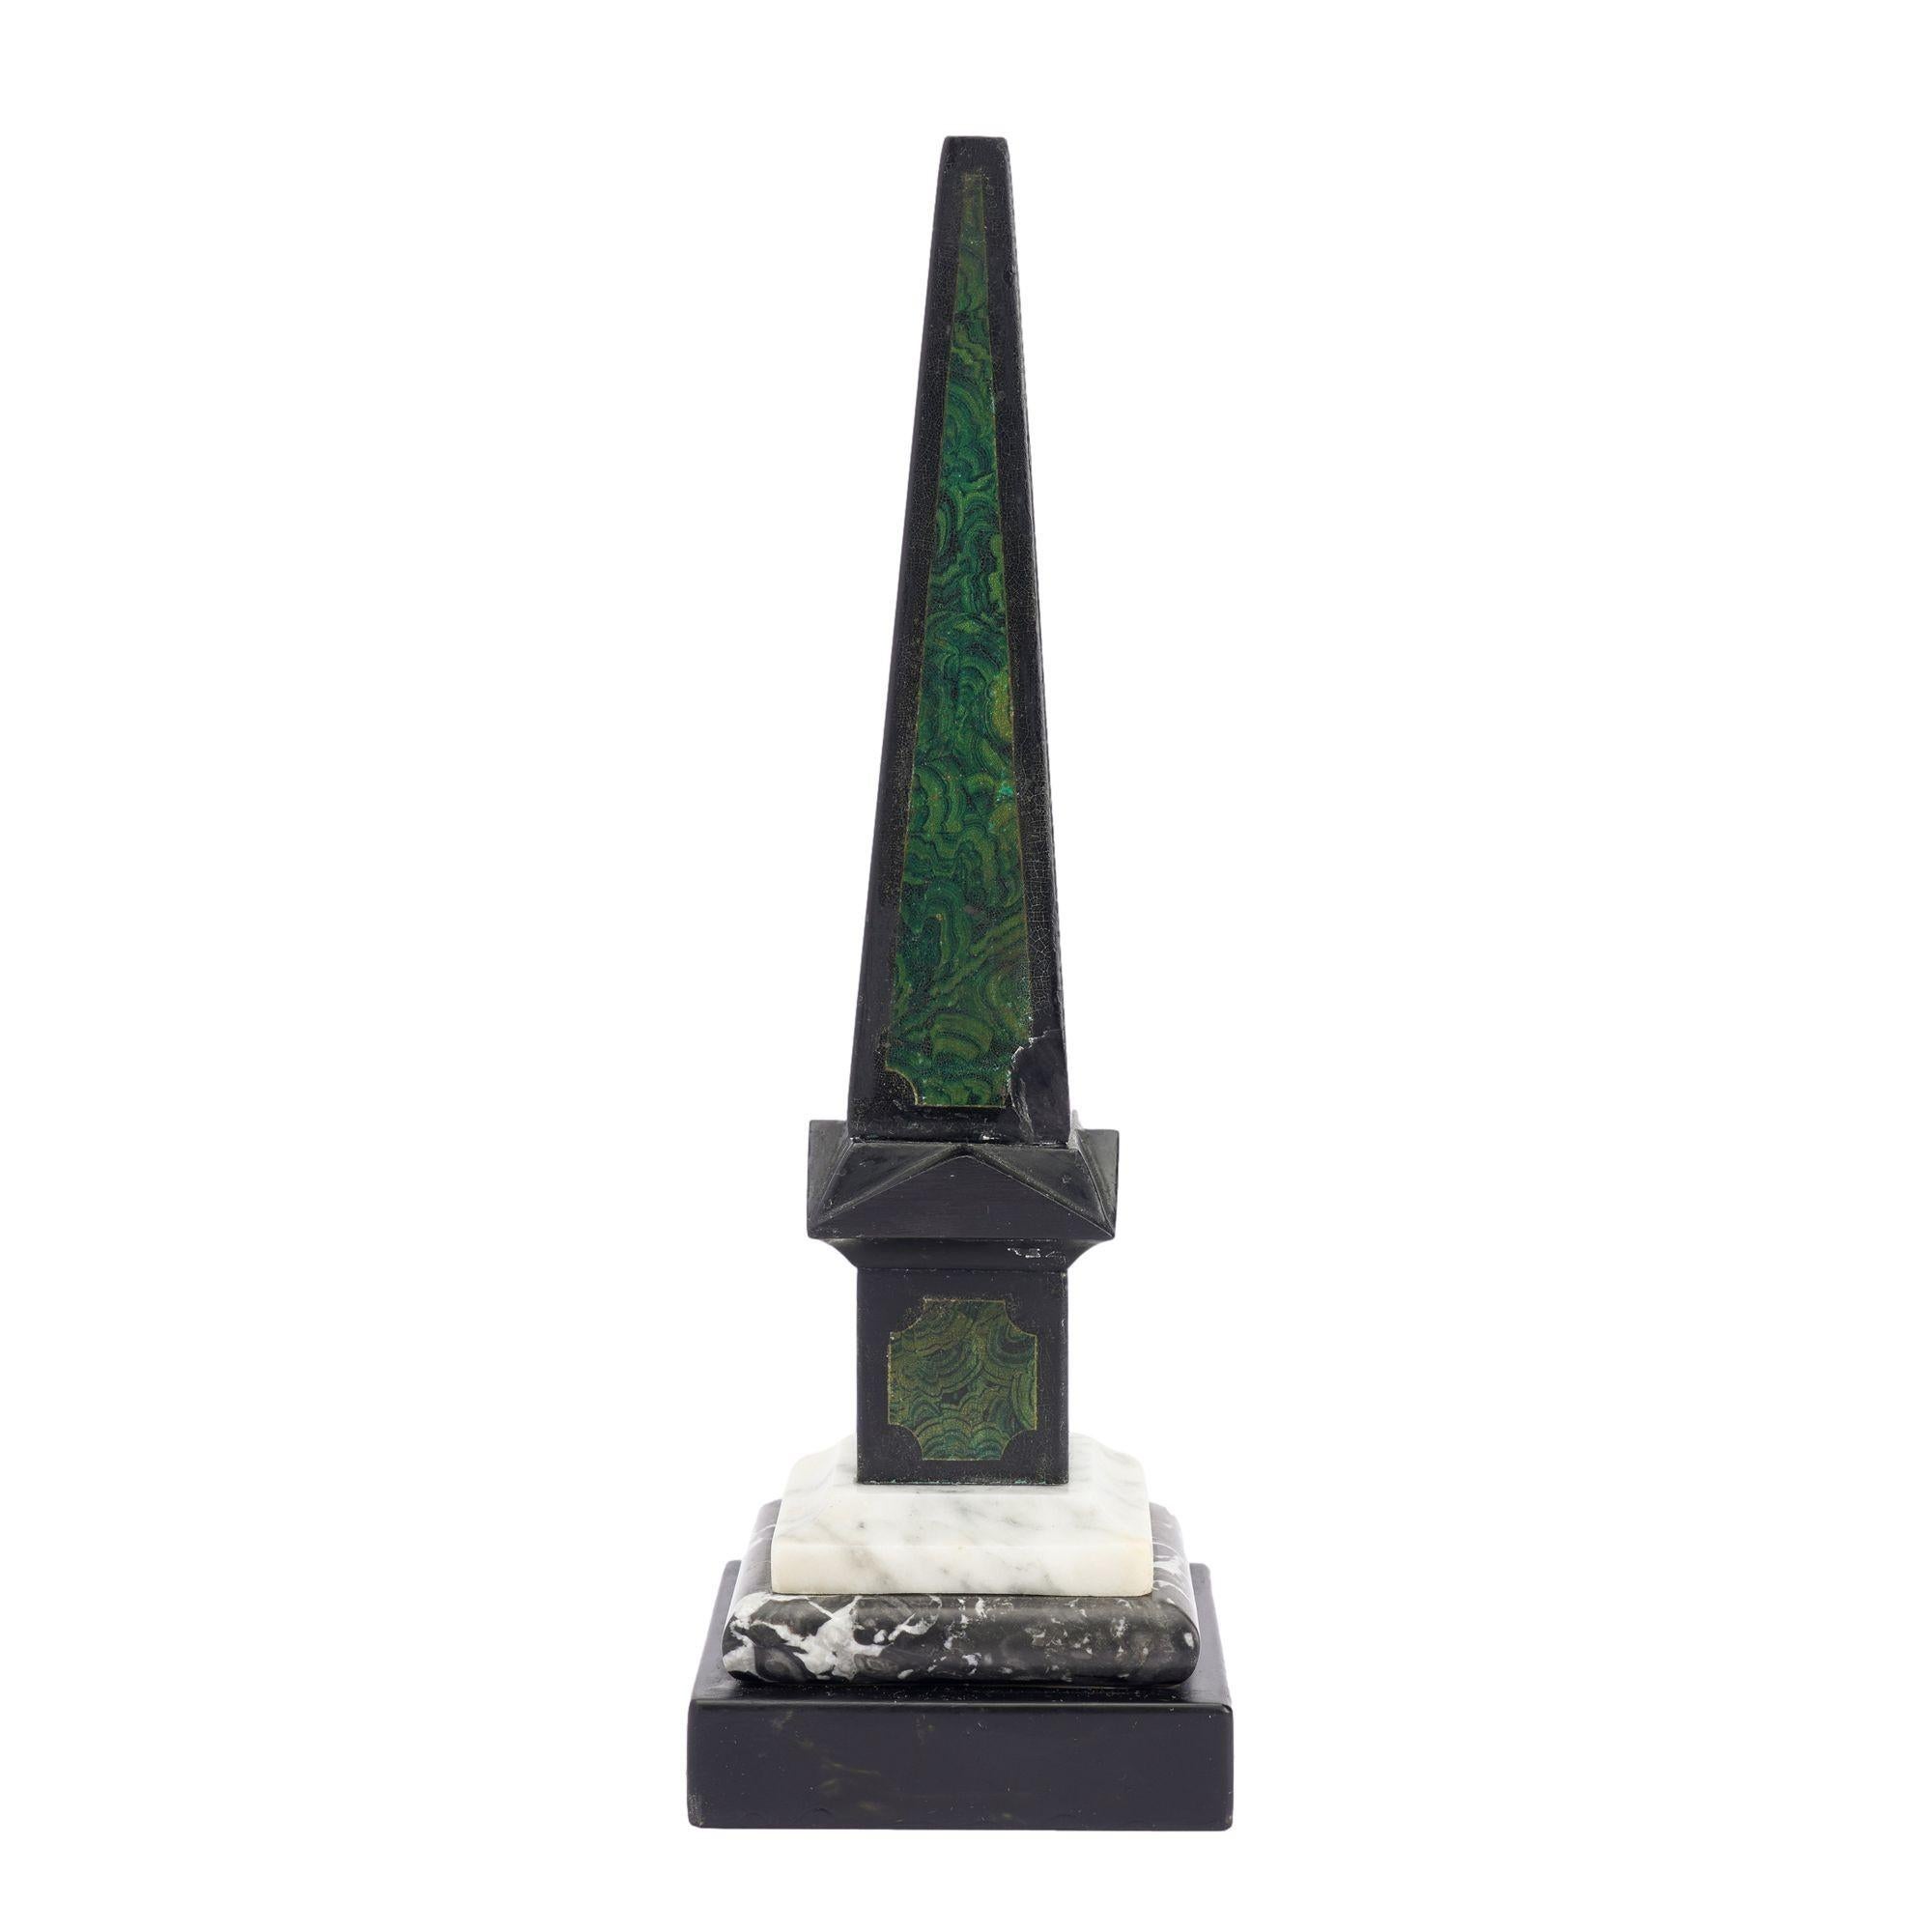 Tapered square obelisk in painted slate with faux malachite panels on three sides, rising from architectural pediments atop each side of the square plinth. The plinth is mounted on a square base of cove cut white marble over a pillow cut gray &